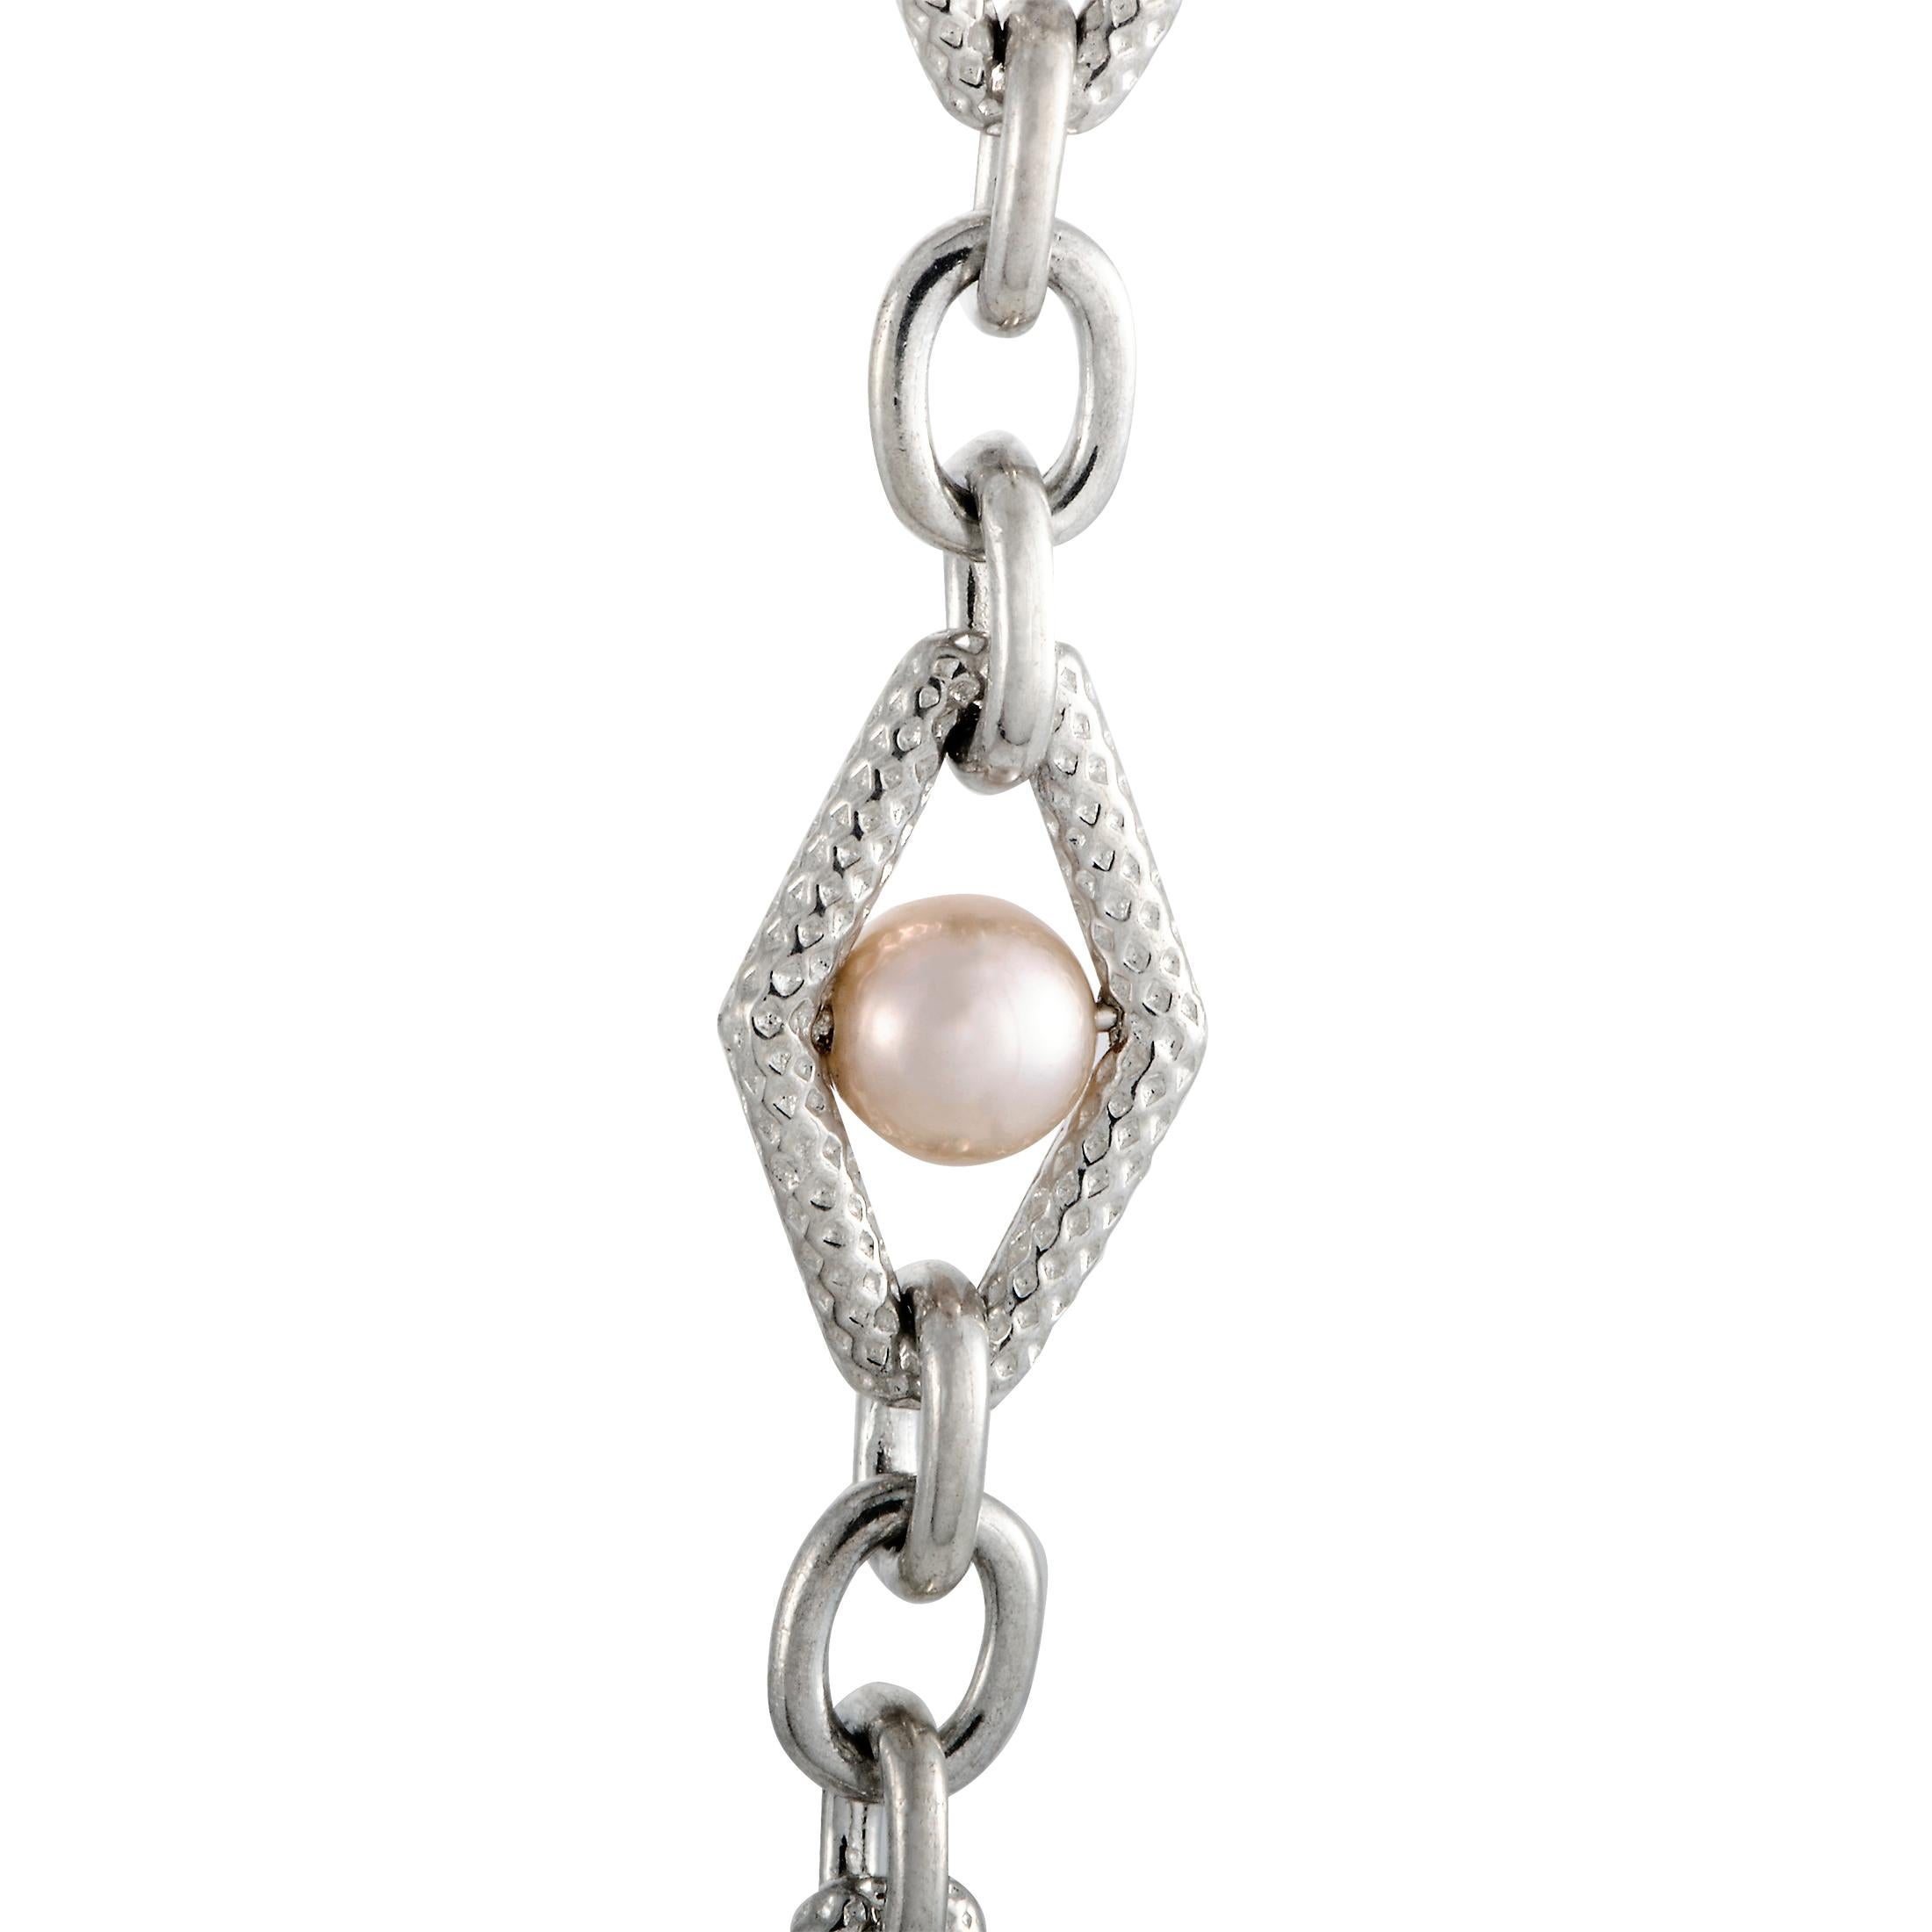 Women's Charles Krypell Silver and Pearl Long Chain Necklace